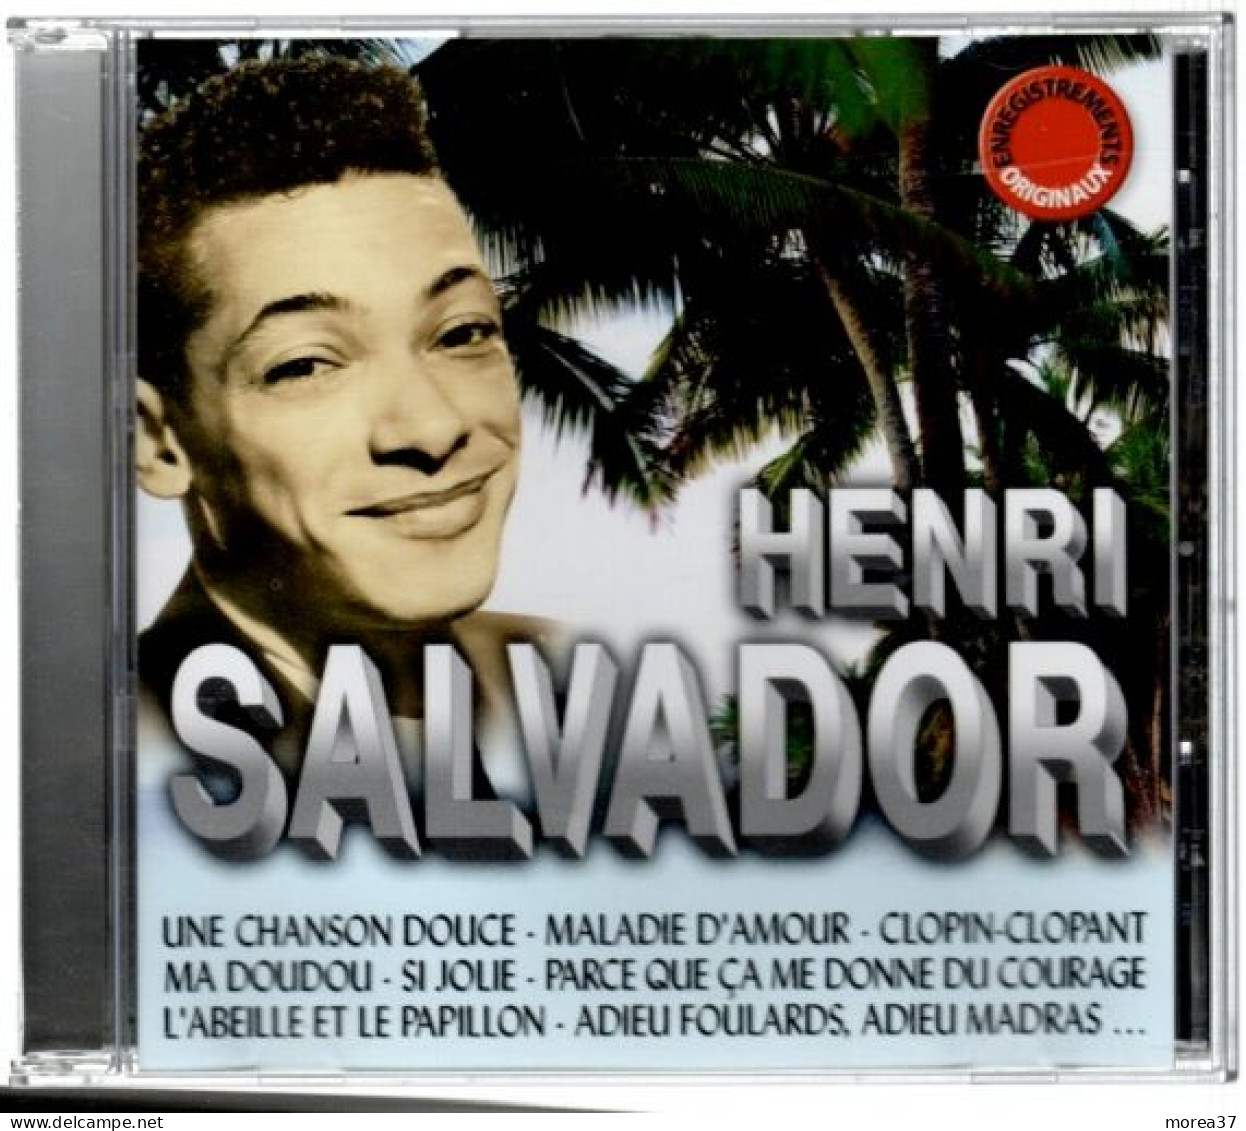 HENRI SALVADOR      (C02) - Other - French Music